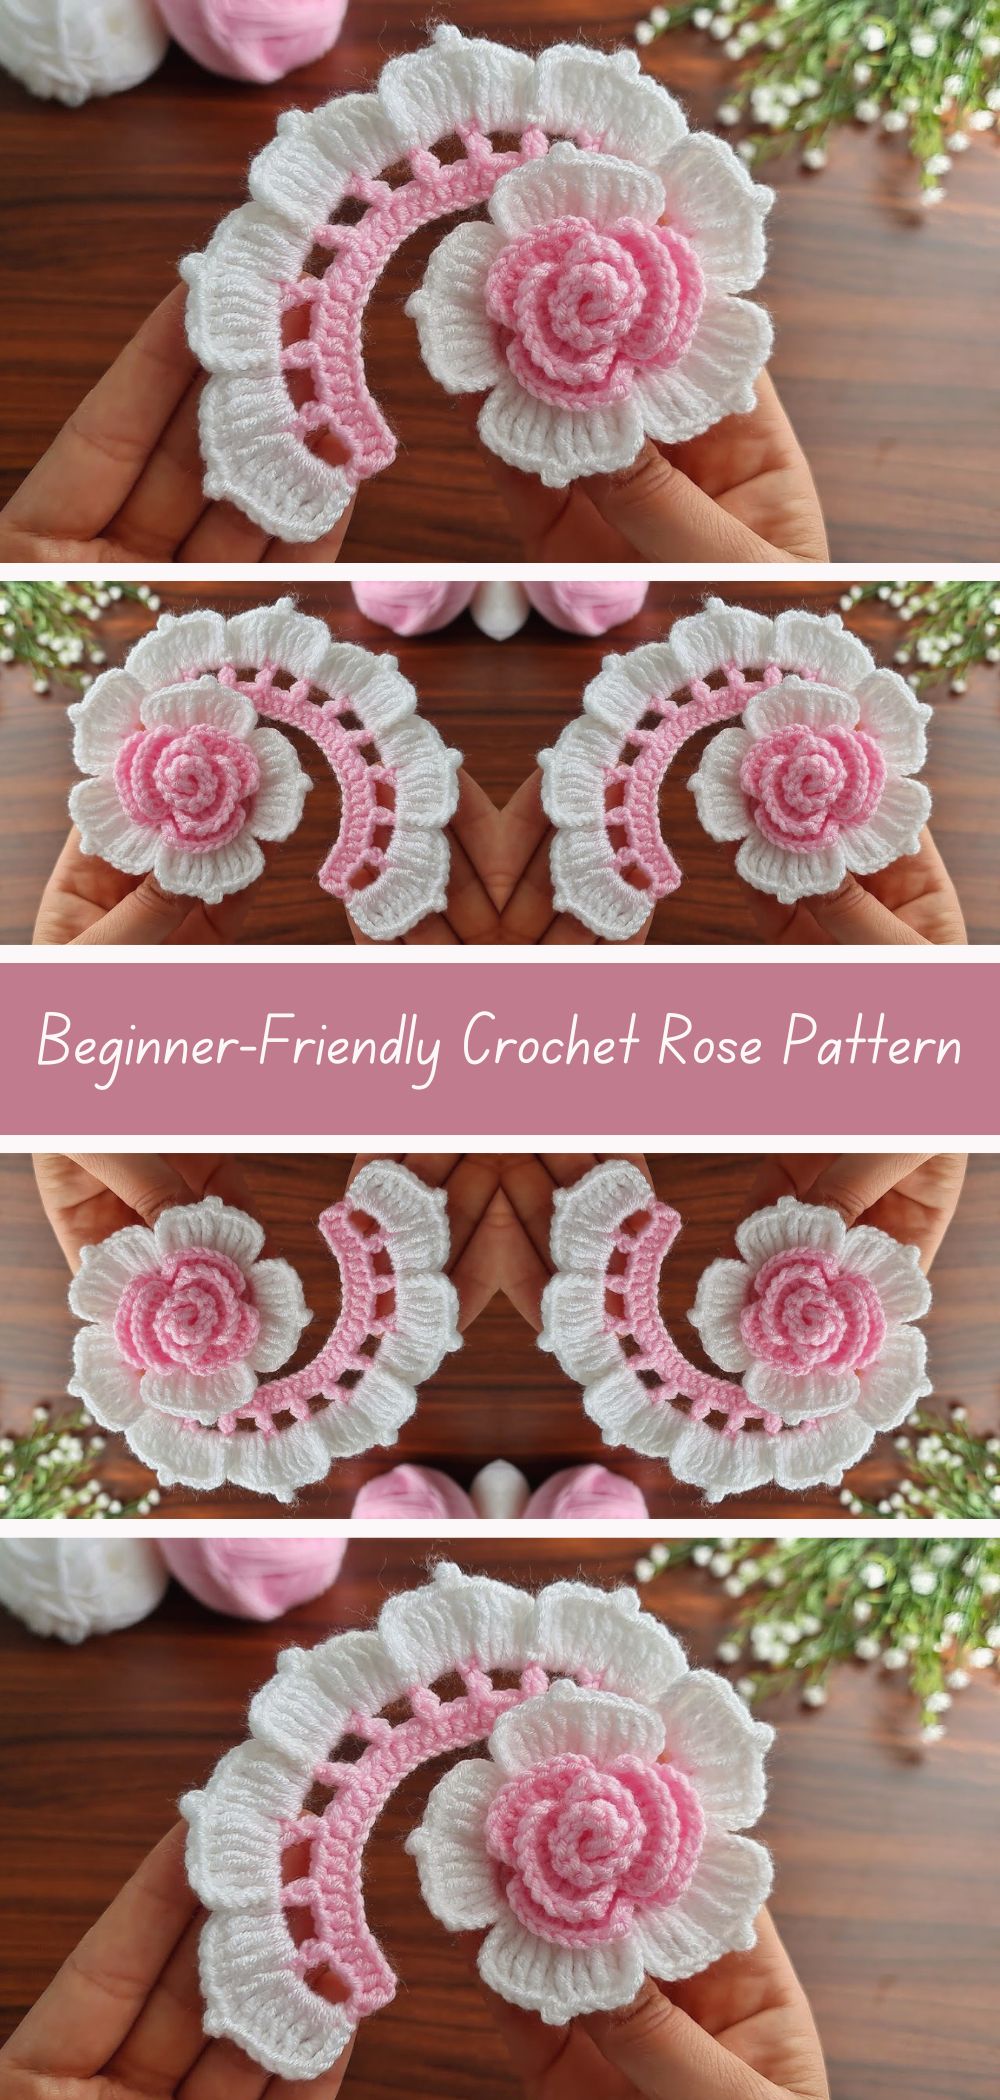 Eye-Catching Crochet Rose Pattern - Create stunning roses with this captivating crochet pattern